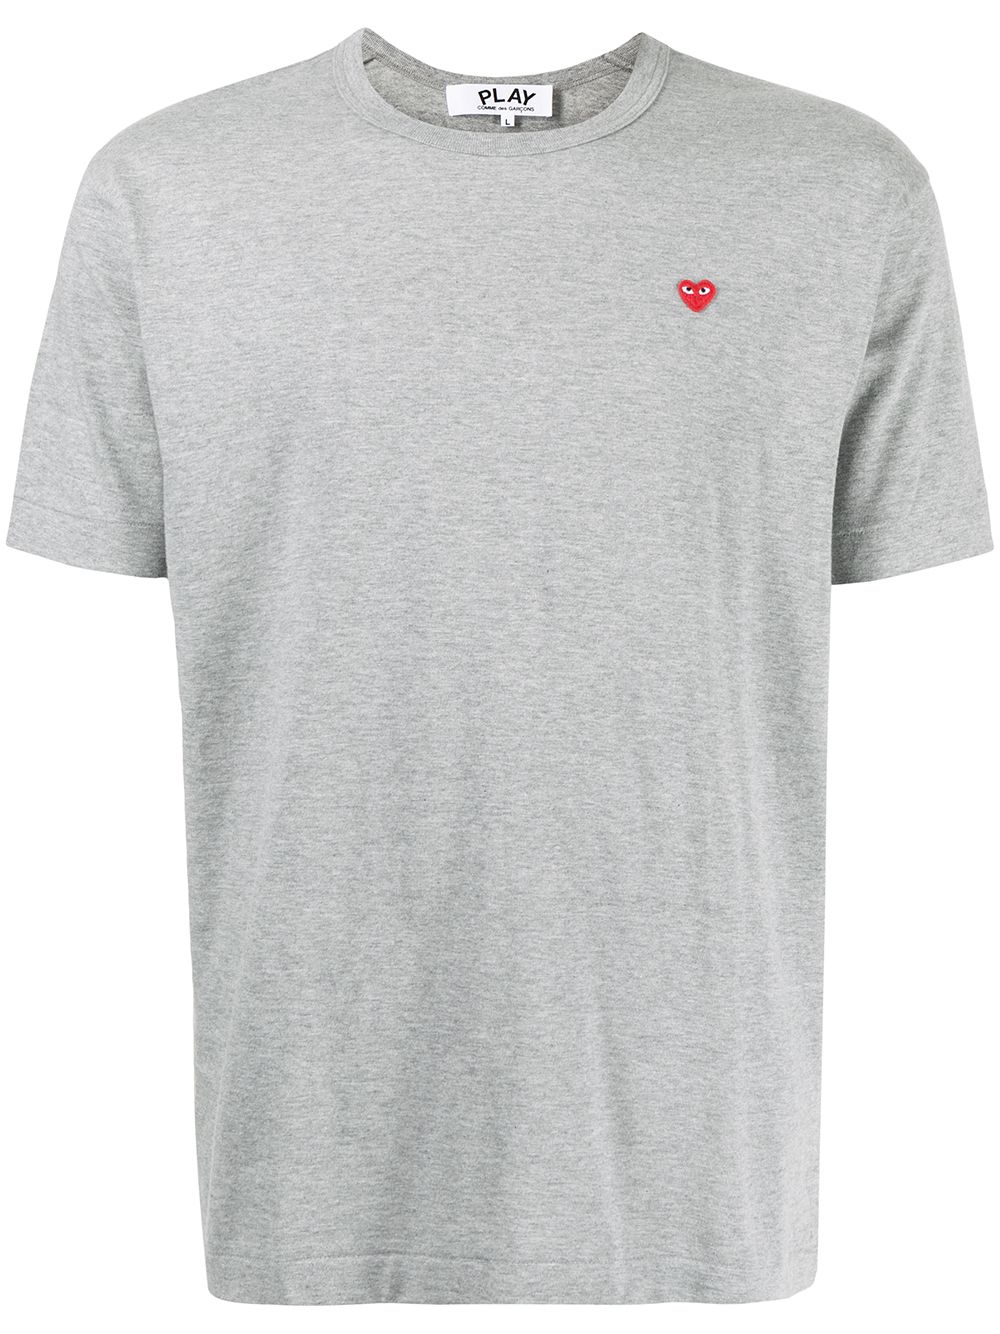 Comme Des Garçons Play embroidered heart T-shirt - Grey von Comme Des Garçons Play